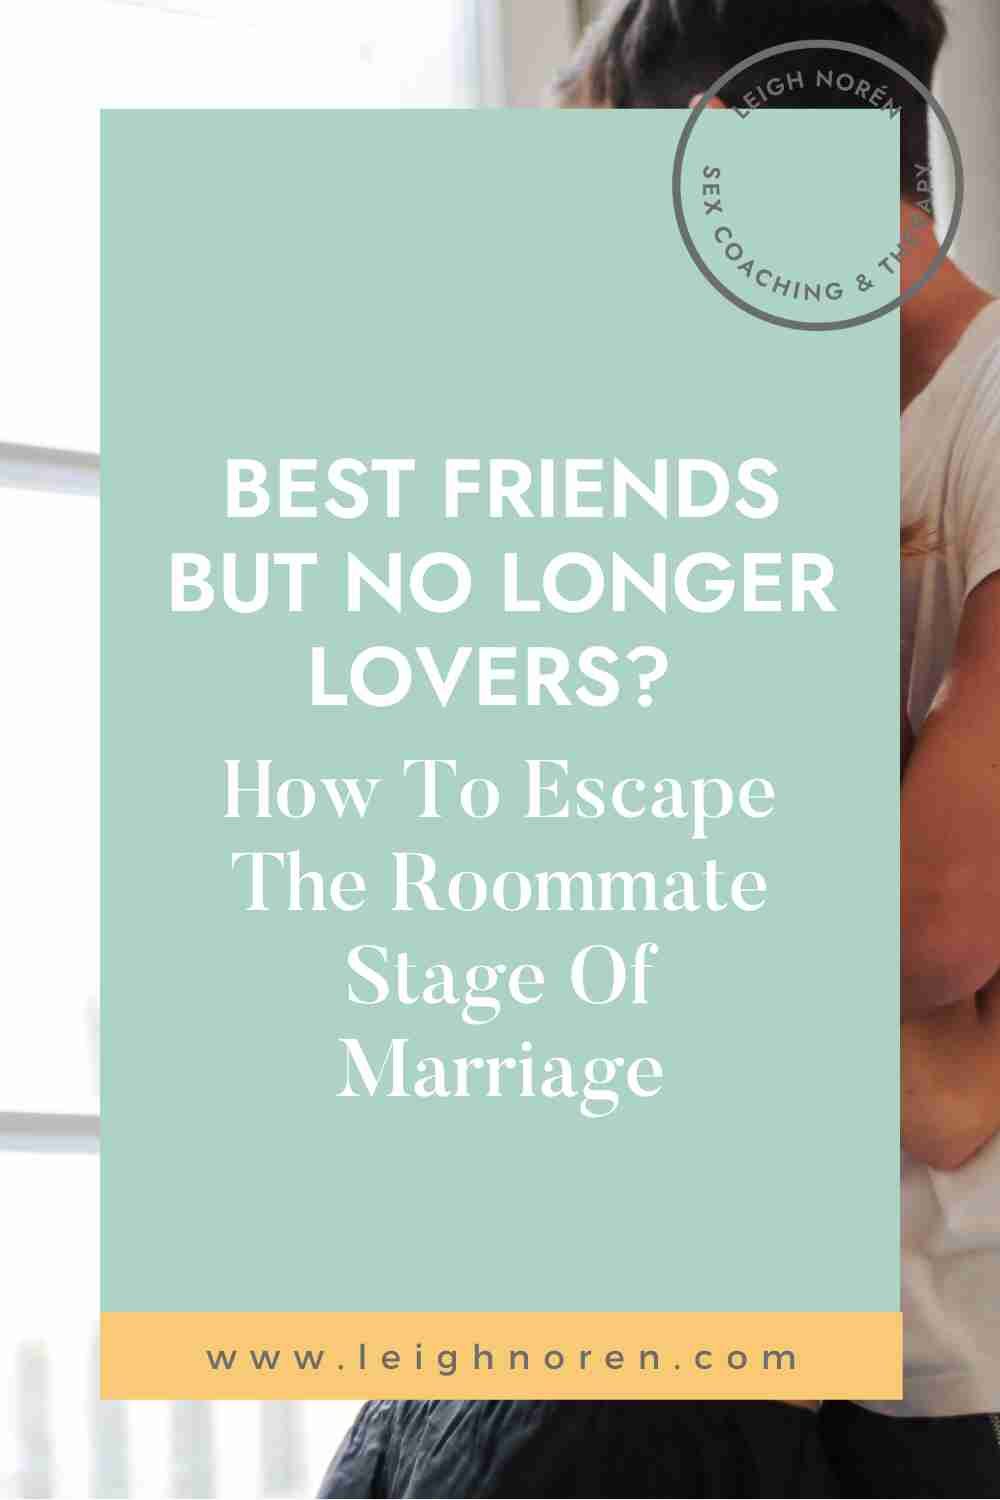 Best Friends But No Longer Lovers? How To Escape The Roommate Stage Of Marriage